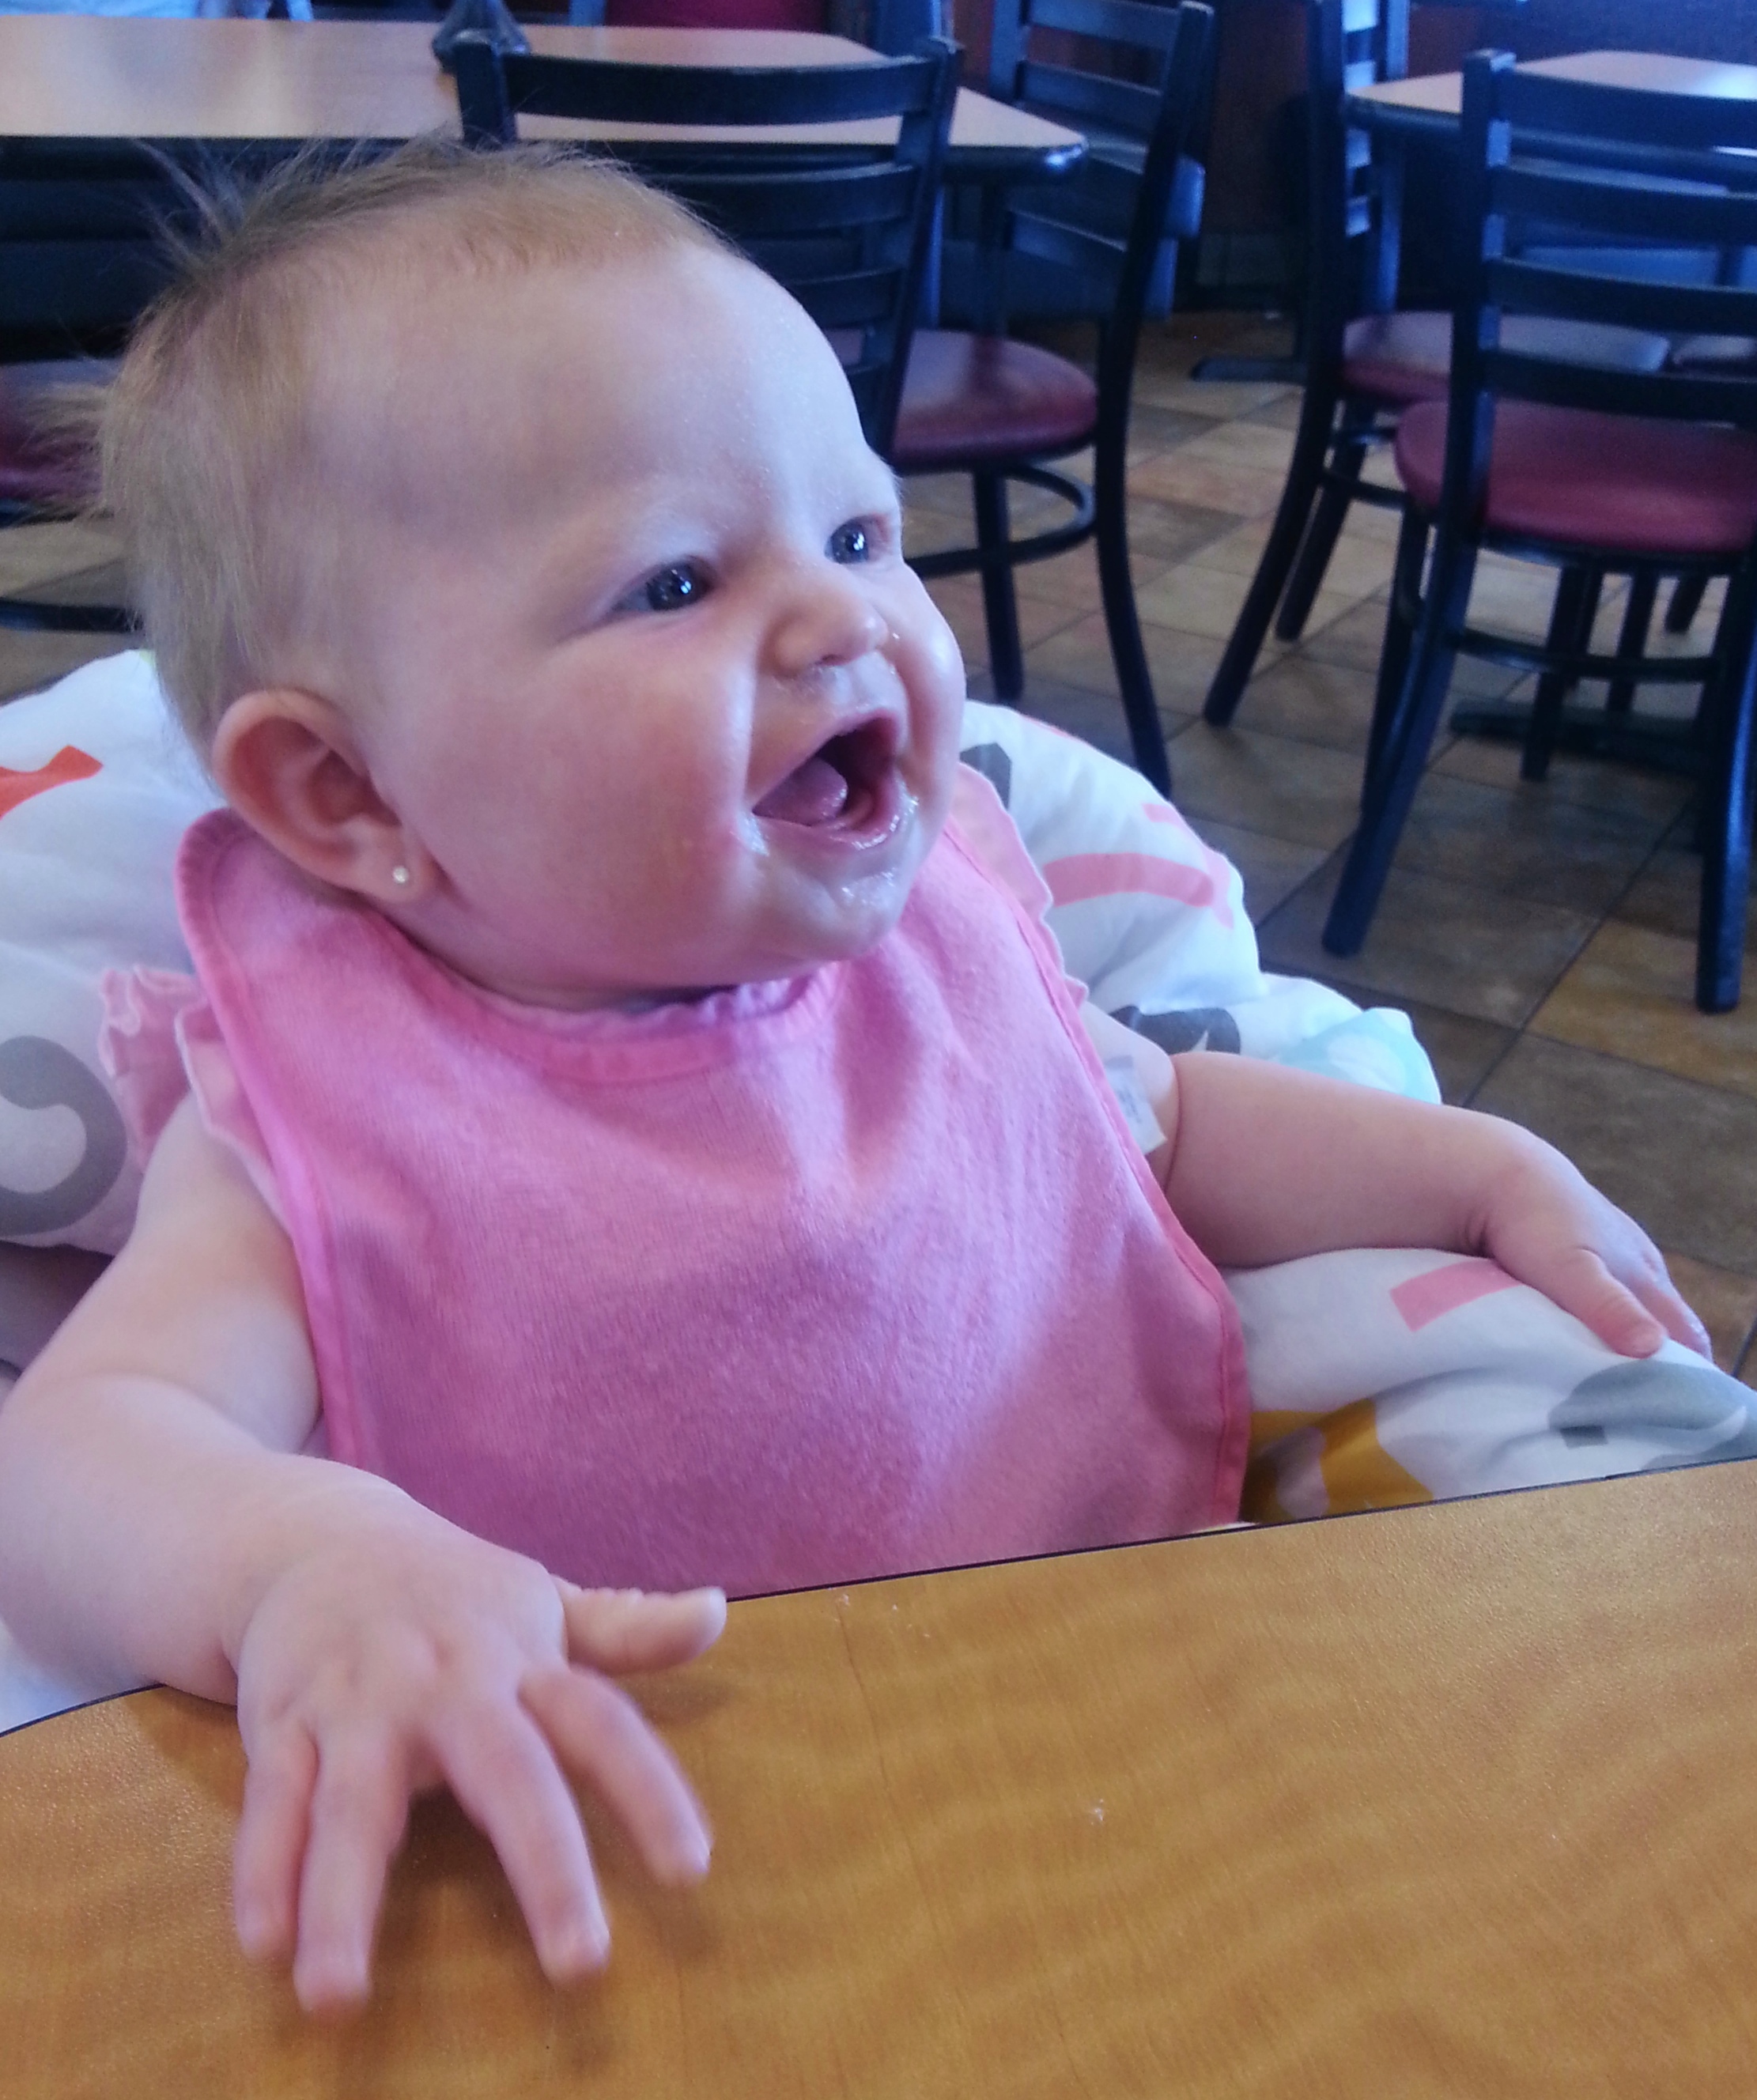 Makenzie has been loving the new views of being in high chairs in restaurants!